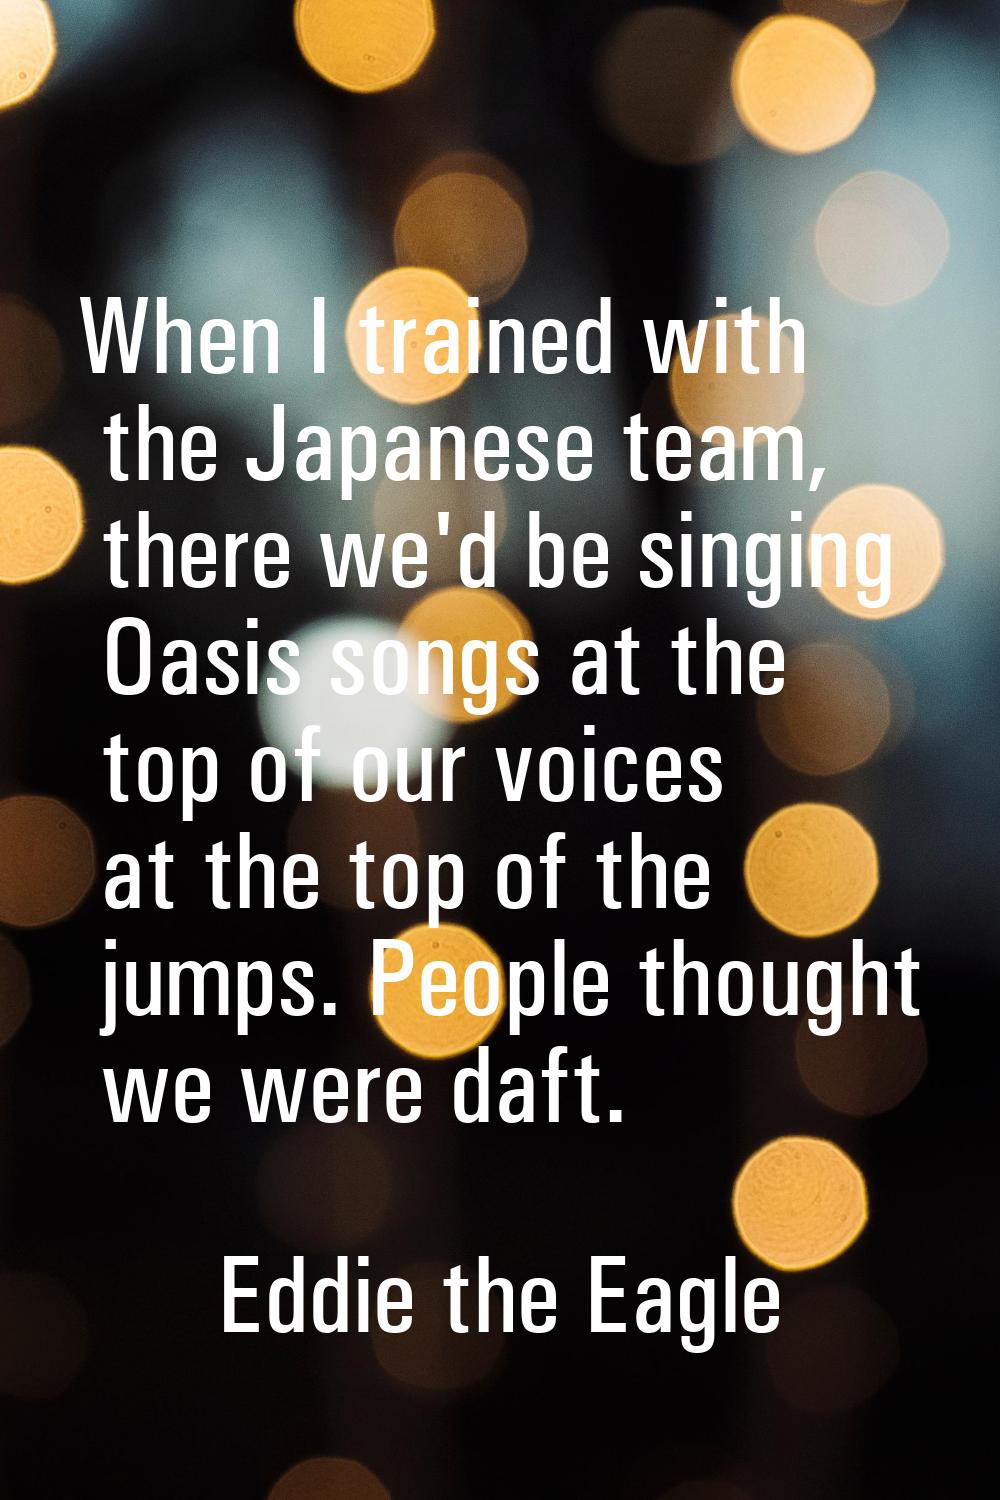 When I trained with the Japanese team, there we'd be singing Oasis songs at the top of our voices a